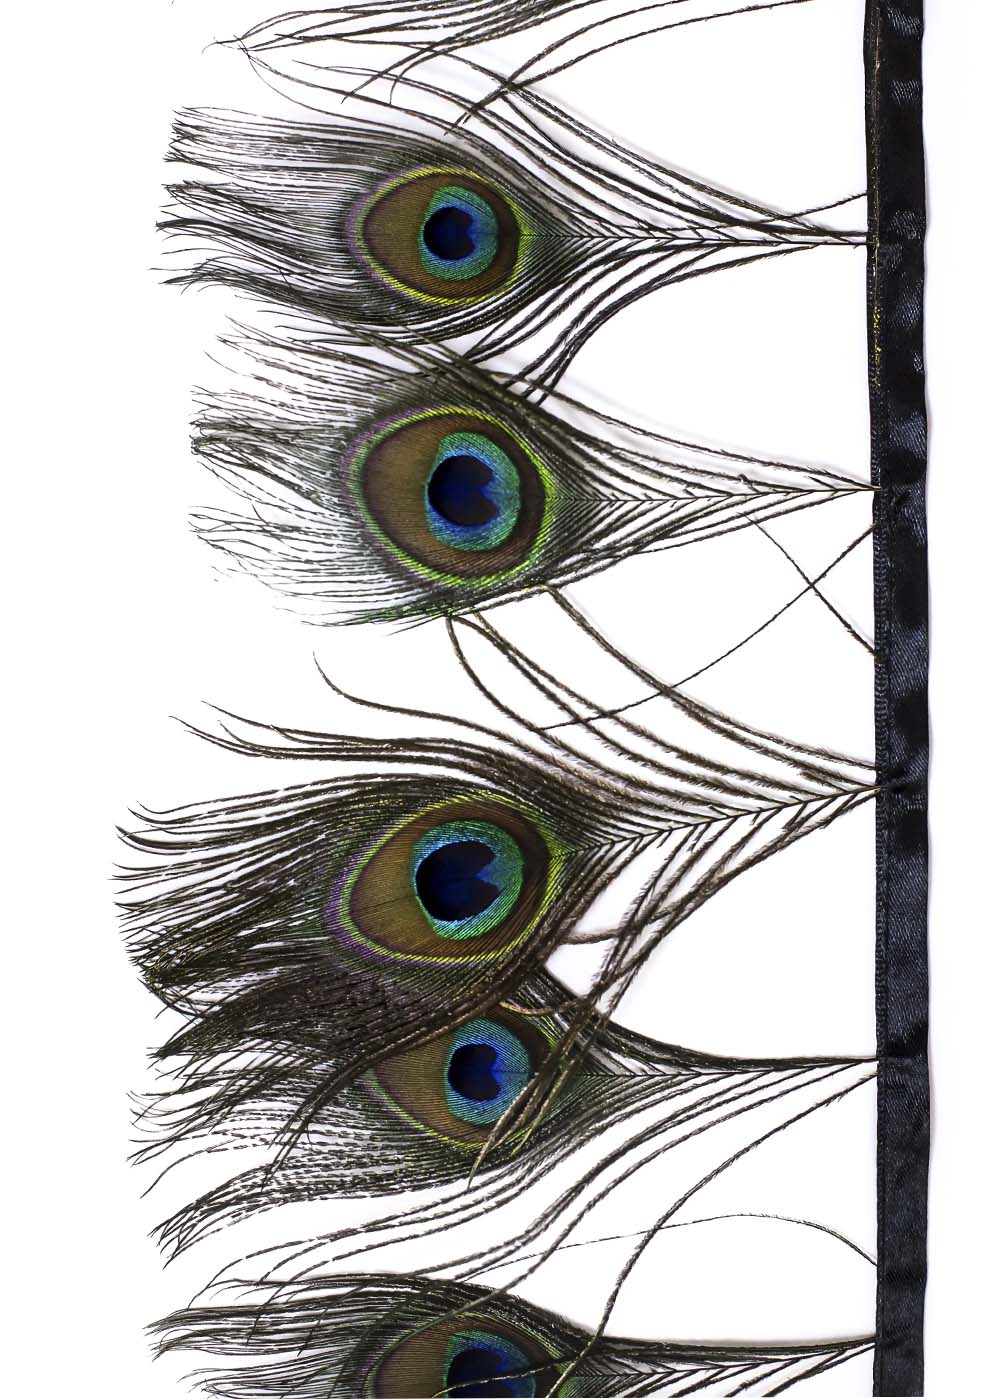 Peacock feathers to buy at the Grand Prix store